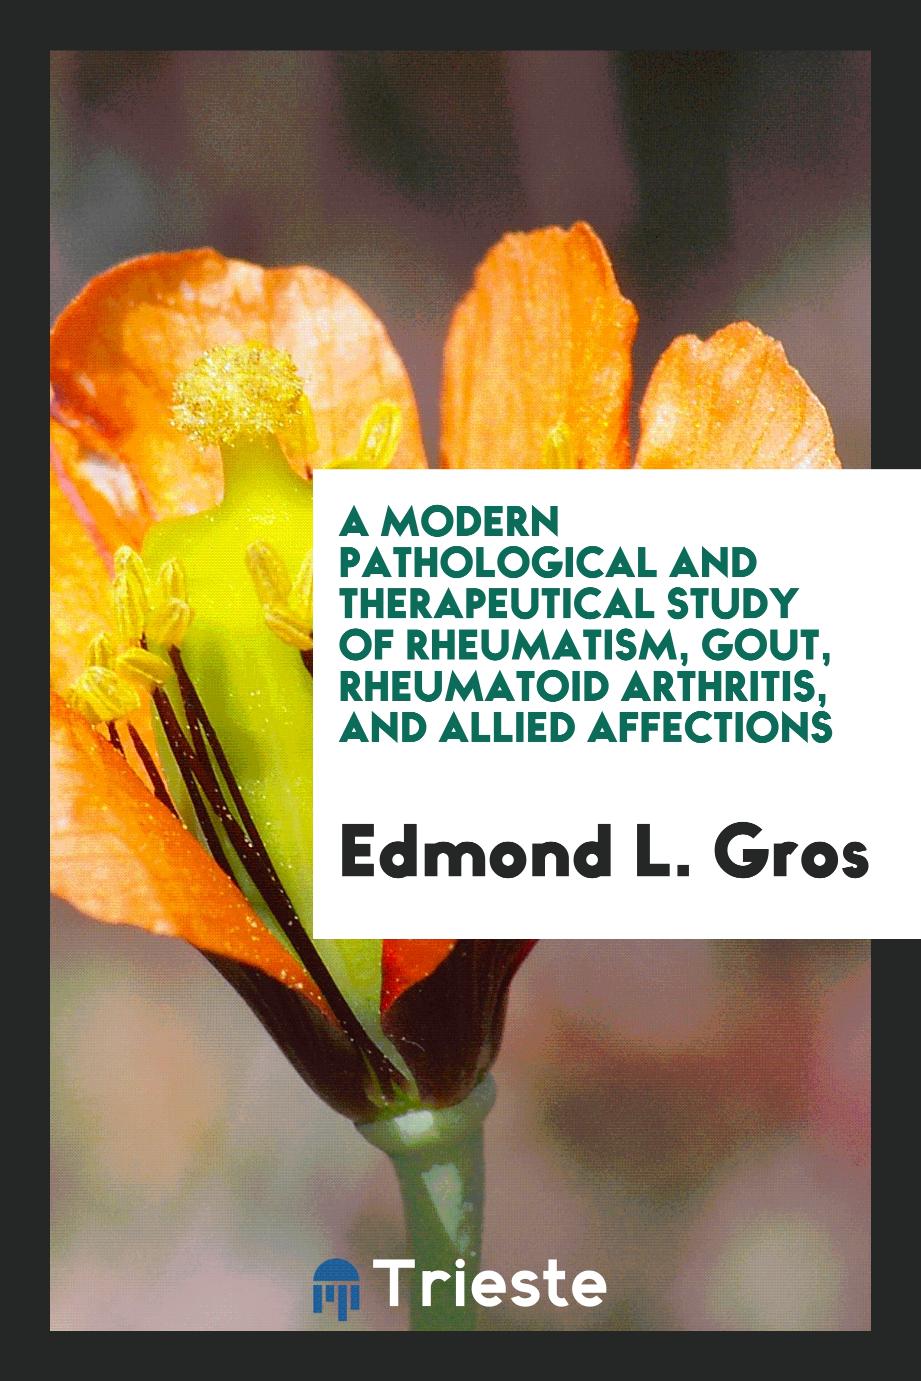 A Modern Pathological and Therapeutical Study of Rheumatism, Gout, Rheumatoid Arthritis, and Allied Affections